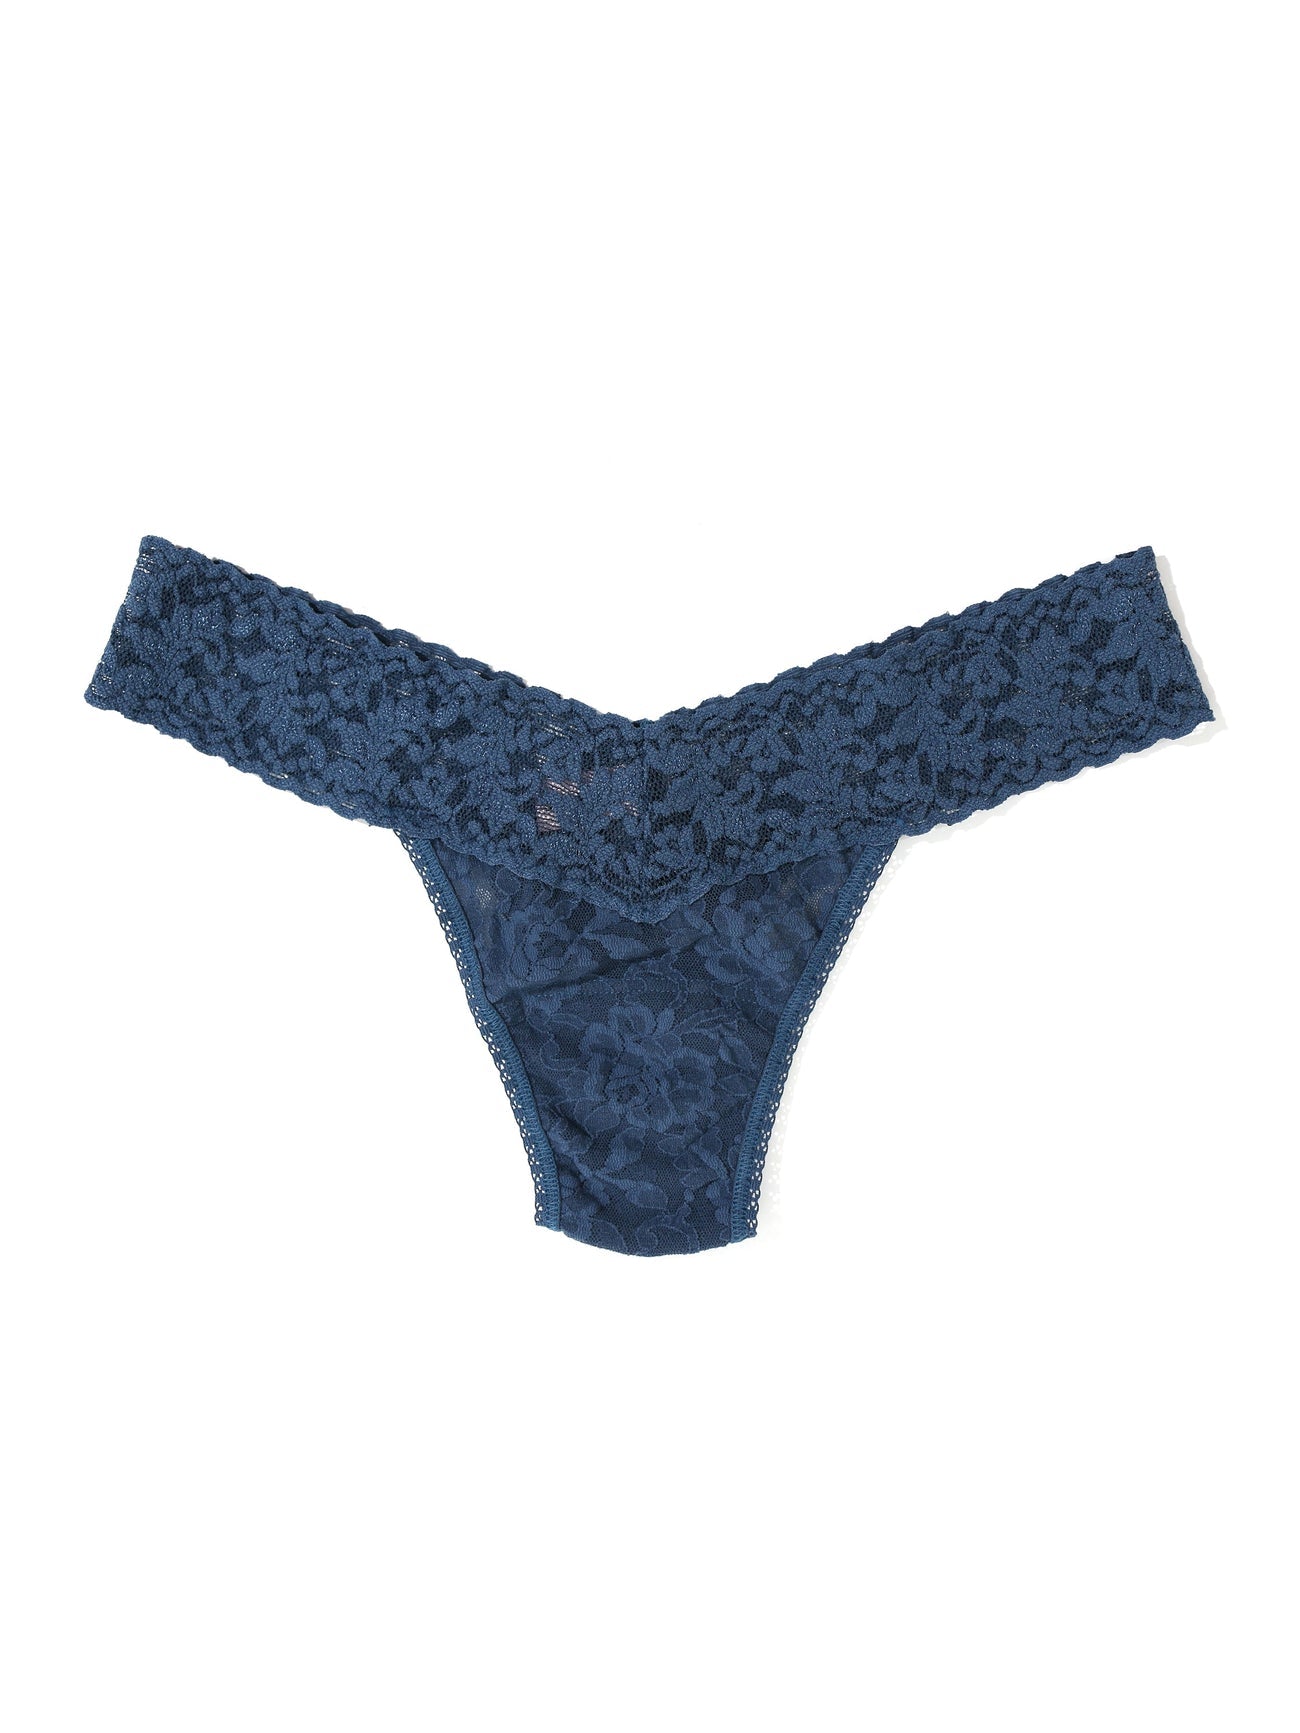 Hanky Panky Signature Lace Low Rise Thong 4911 - In the Mood Intimates -  Hanky Panky Thongs